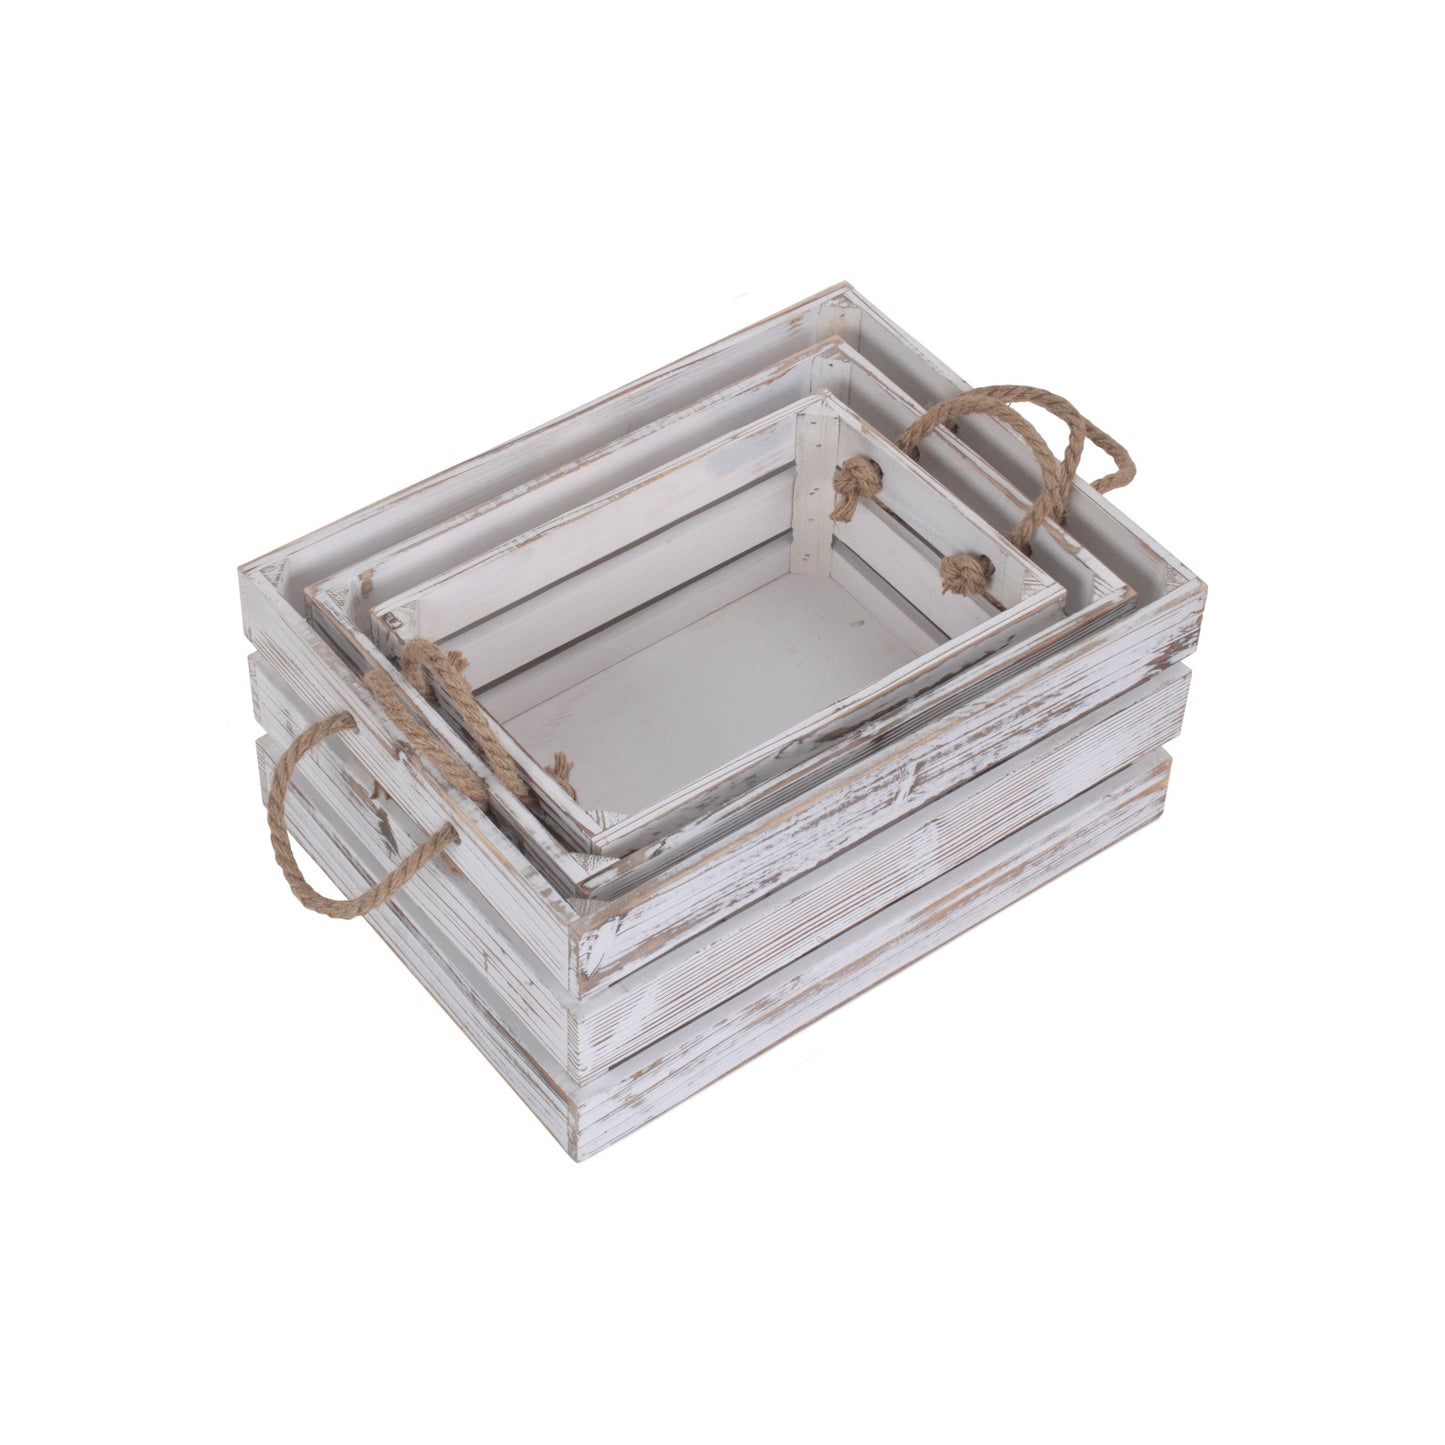 Distressed White Rope Handled Crate Set 3